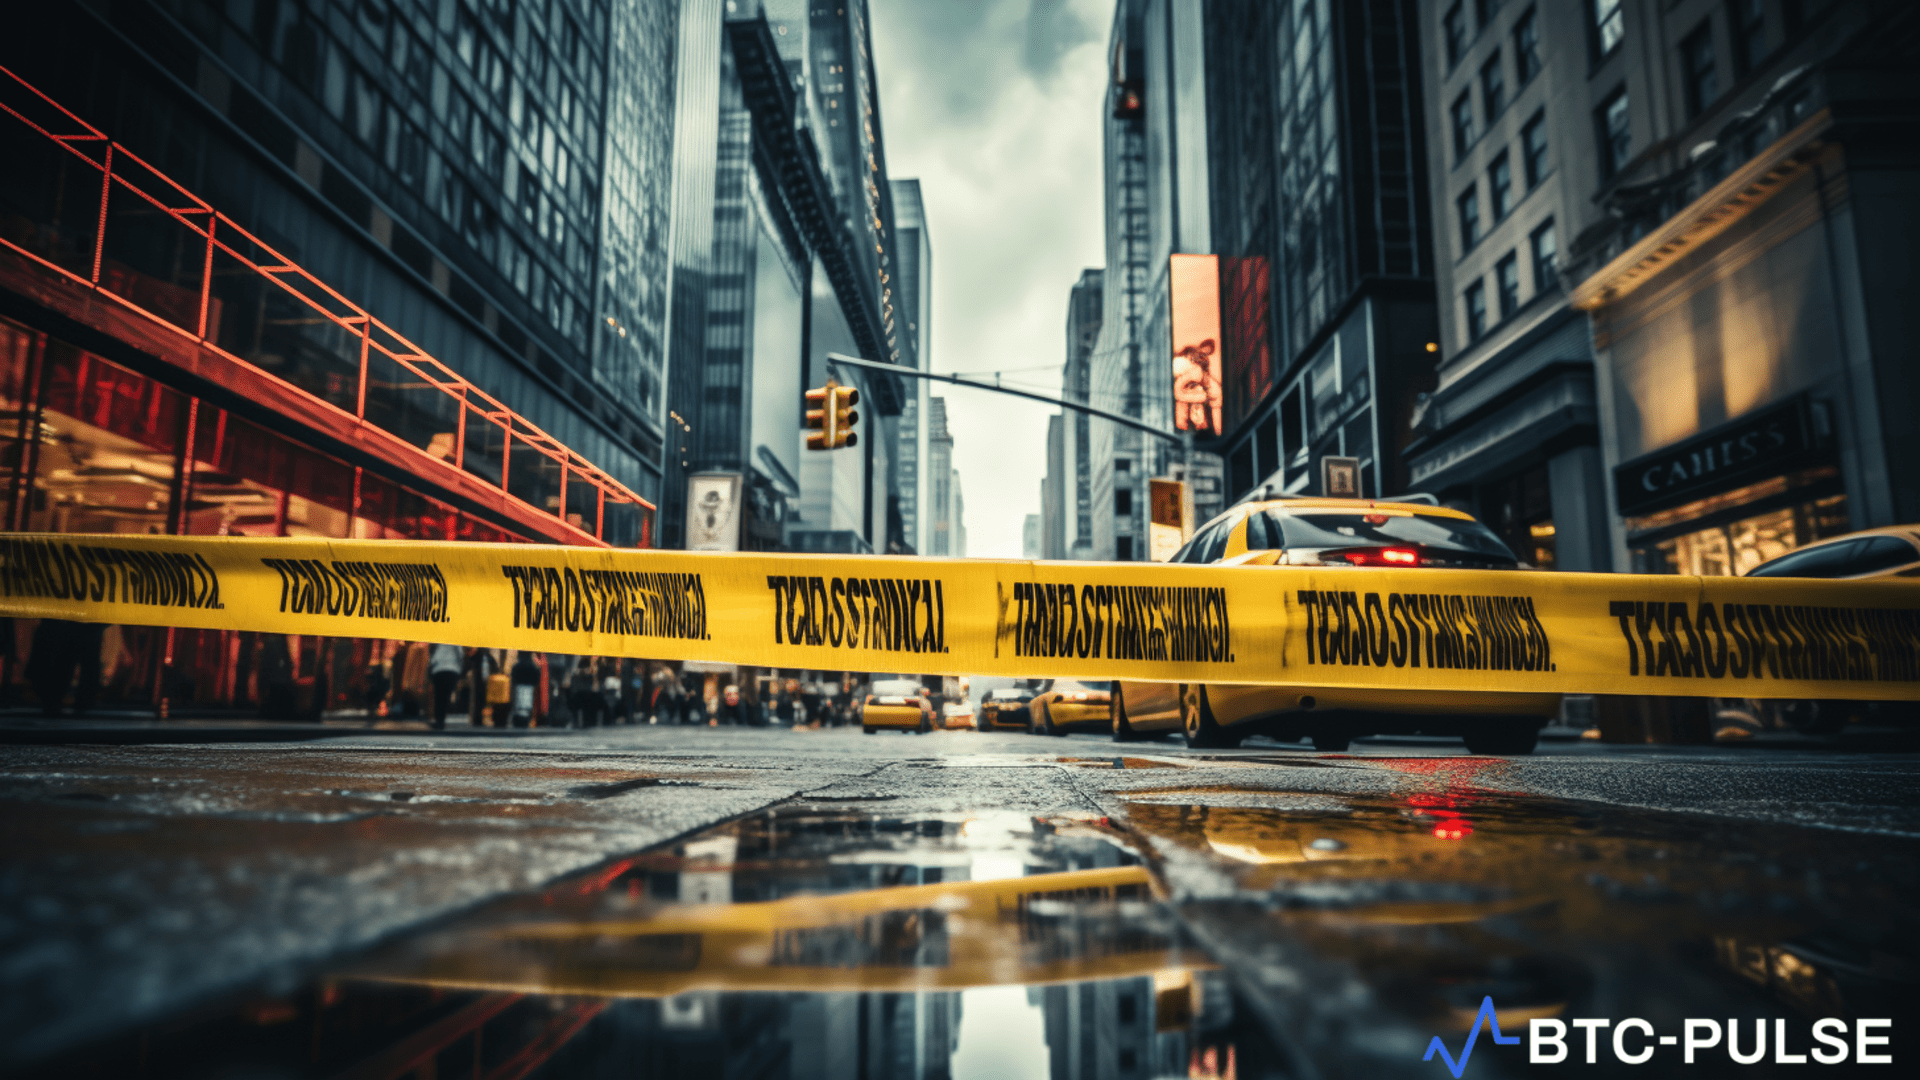 Image shows a Wall Street sign with overlaid caution tape, symbolizing regulatory scrutiny.